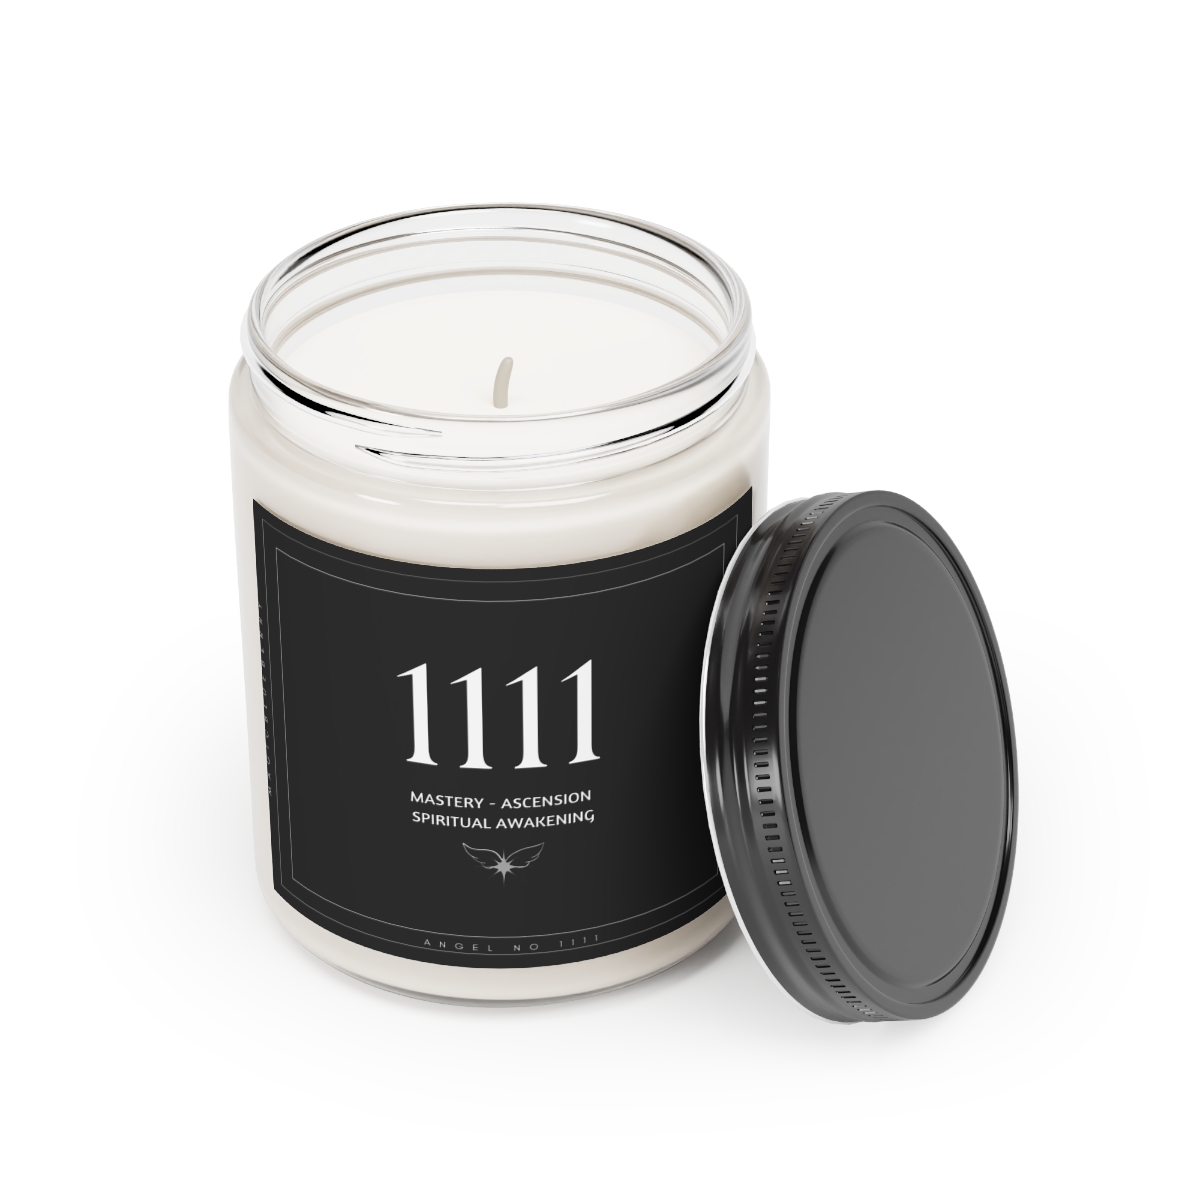 Angel Spell 1111 - Scented Vegan Soy Wax Candles, Clear Jar Candle, Spell Candles, Sassy Candle, Vegan Candle, Cotton Wick Candle product thumbnail image